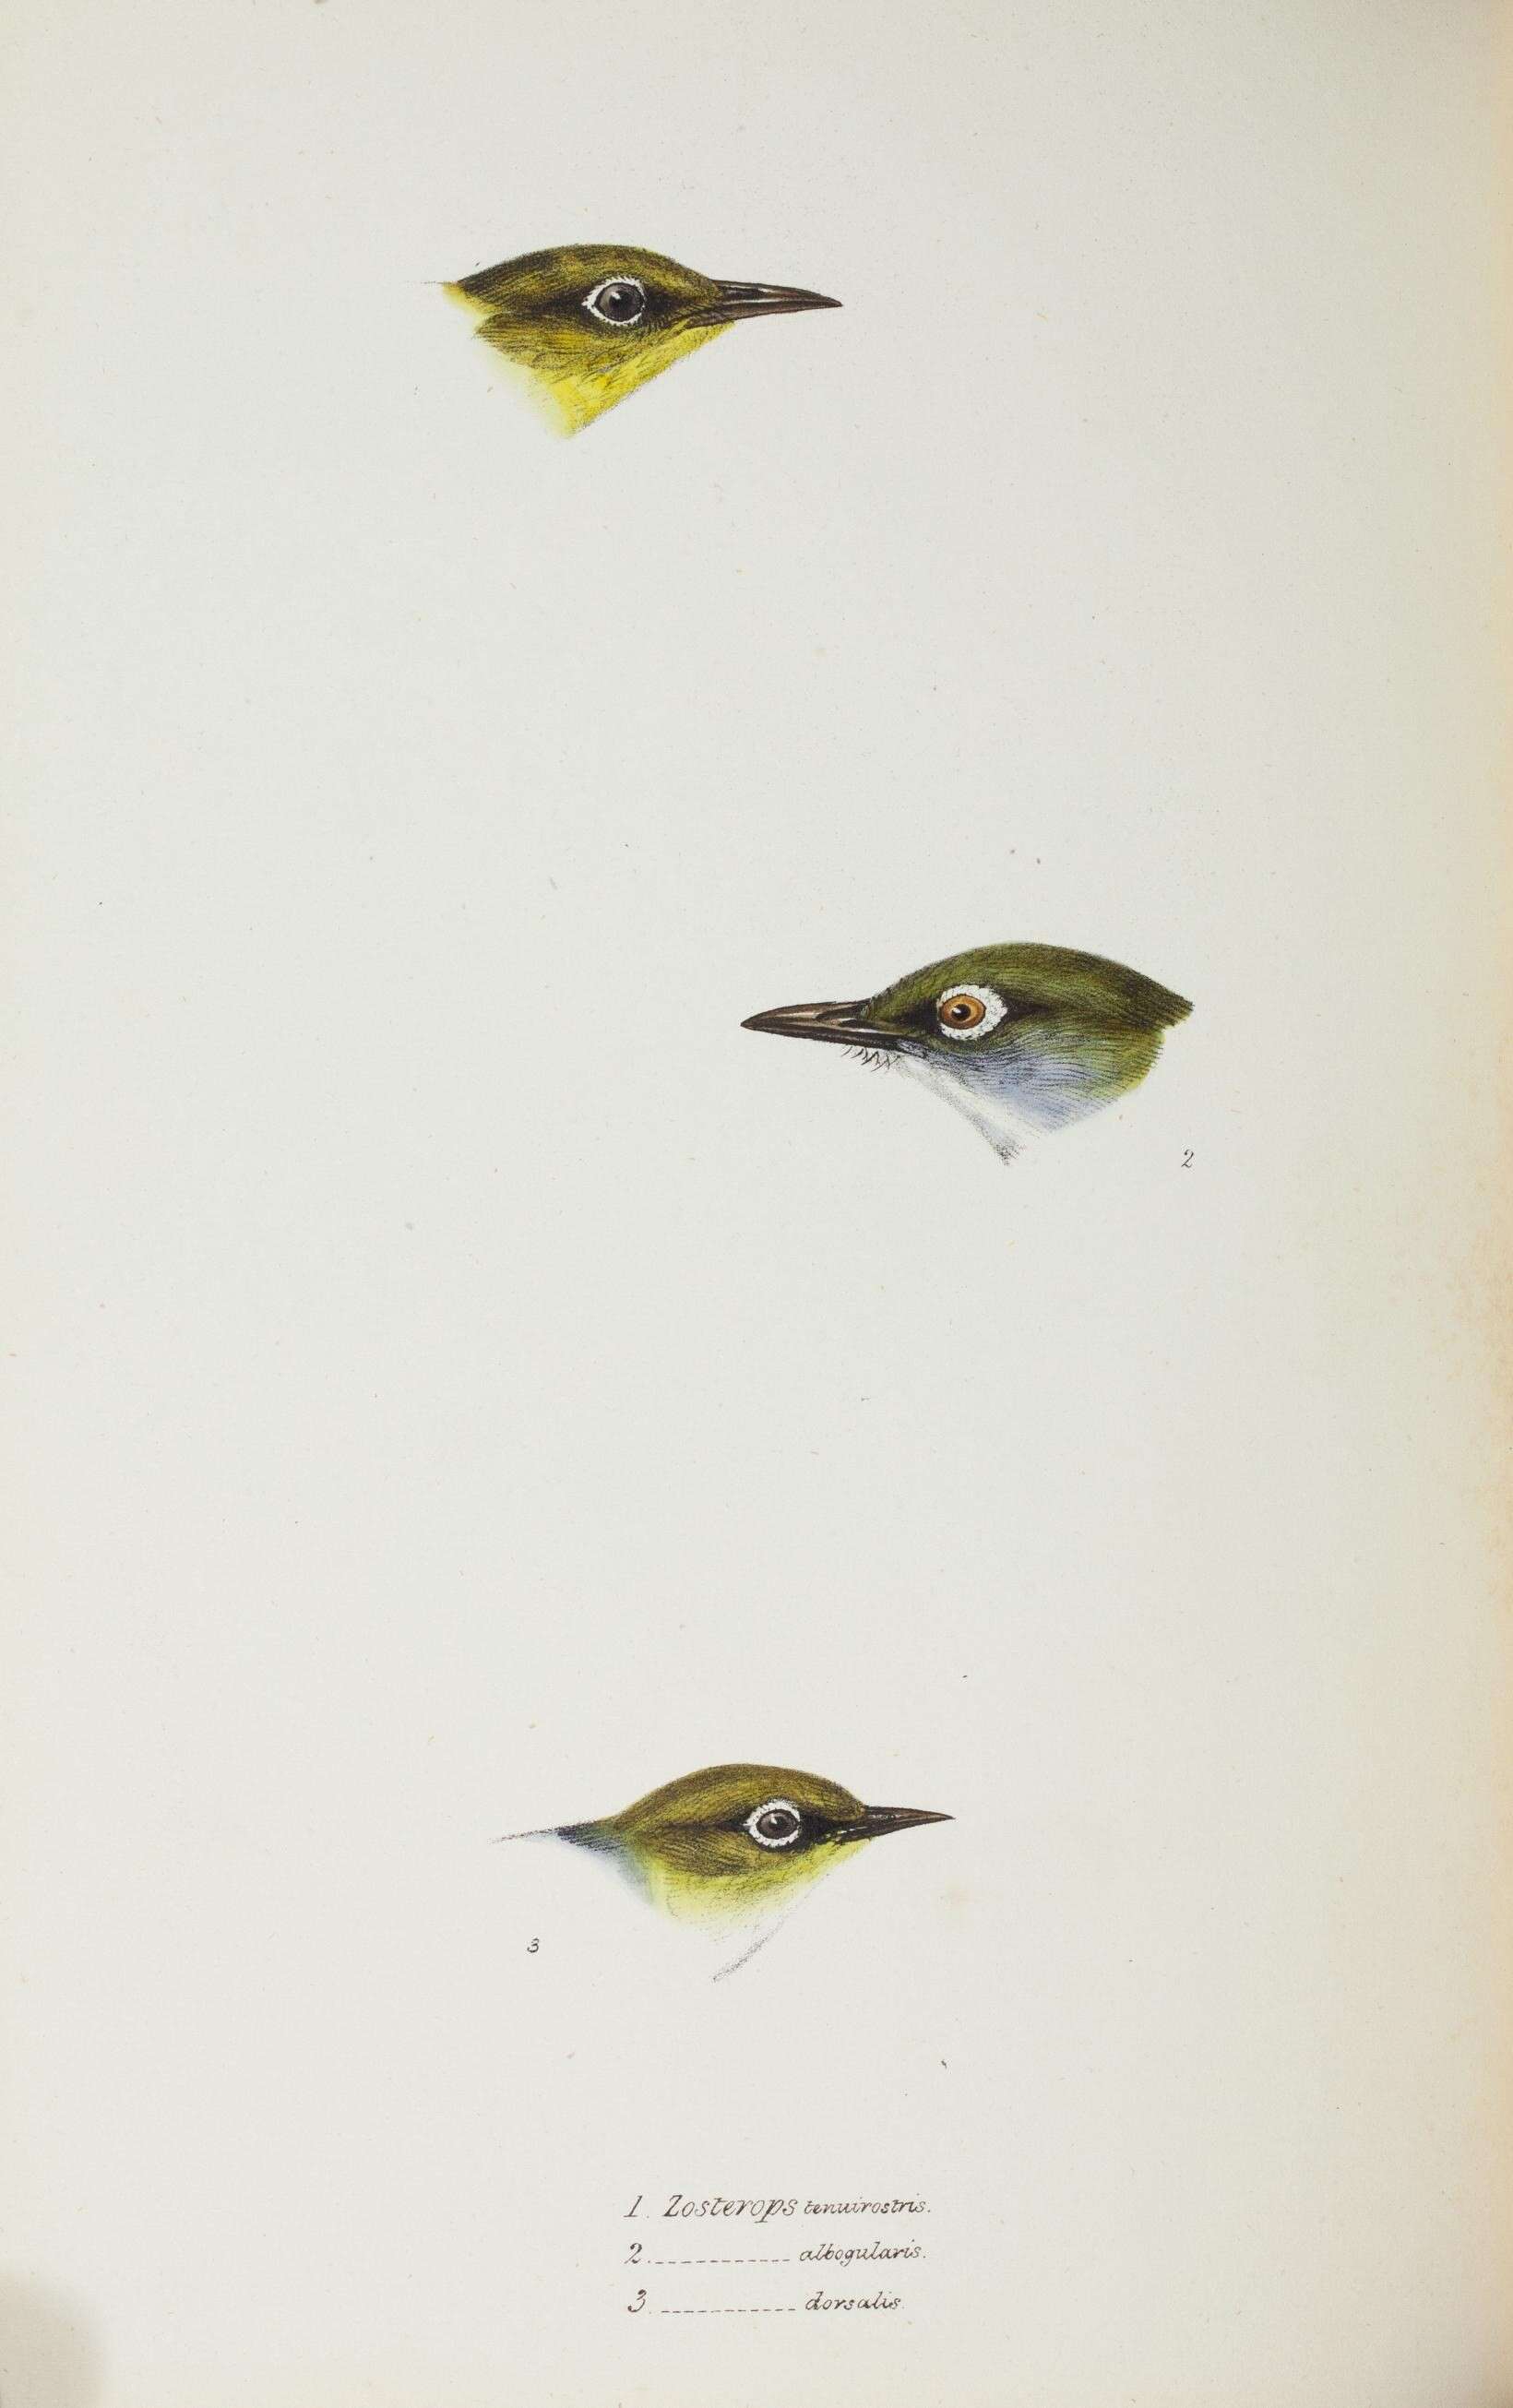 Image of Zosterops Vigors & Horsfield 1827